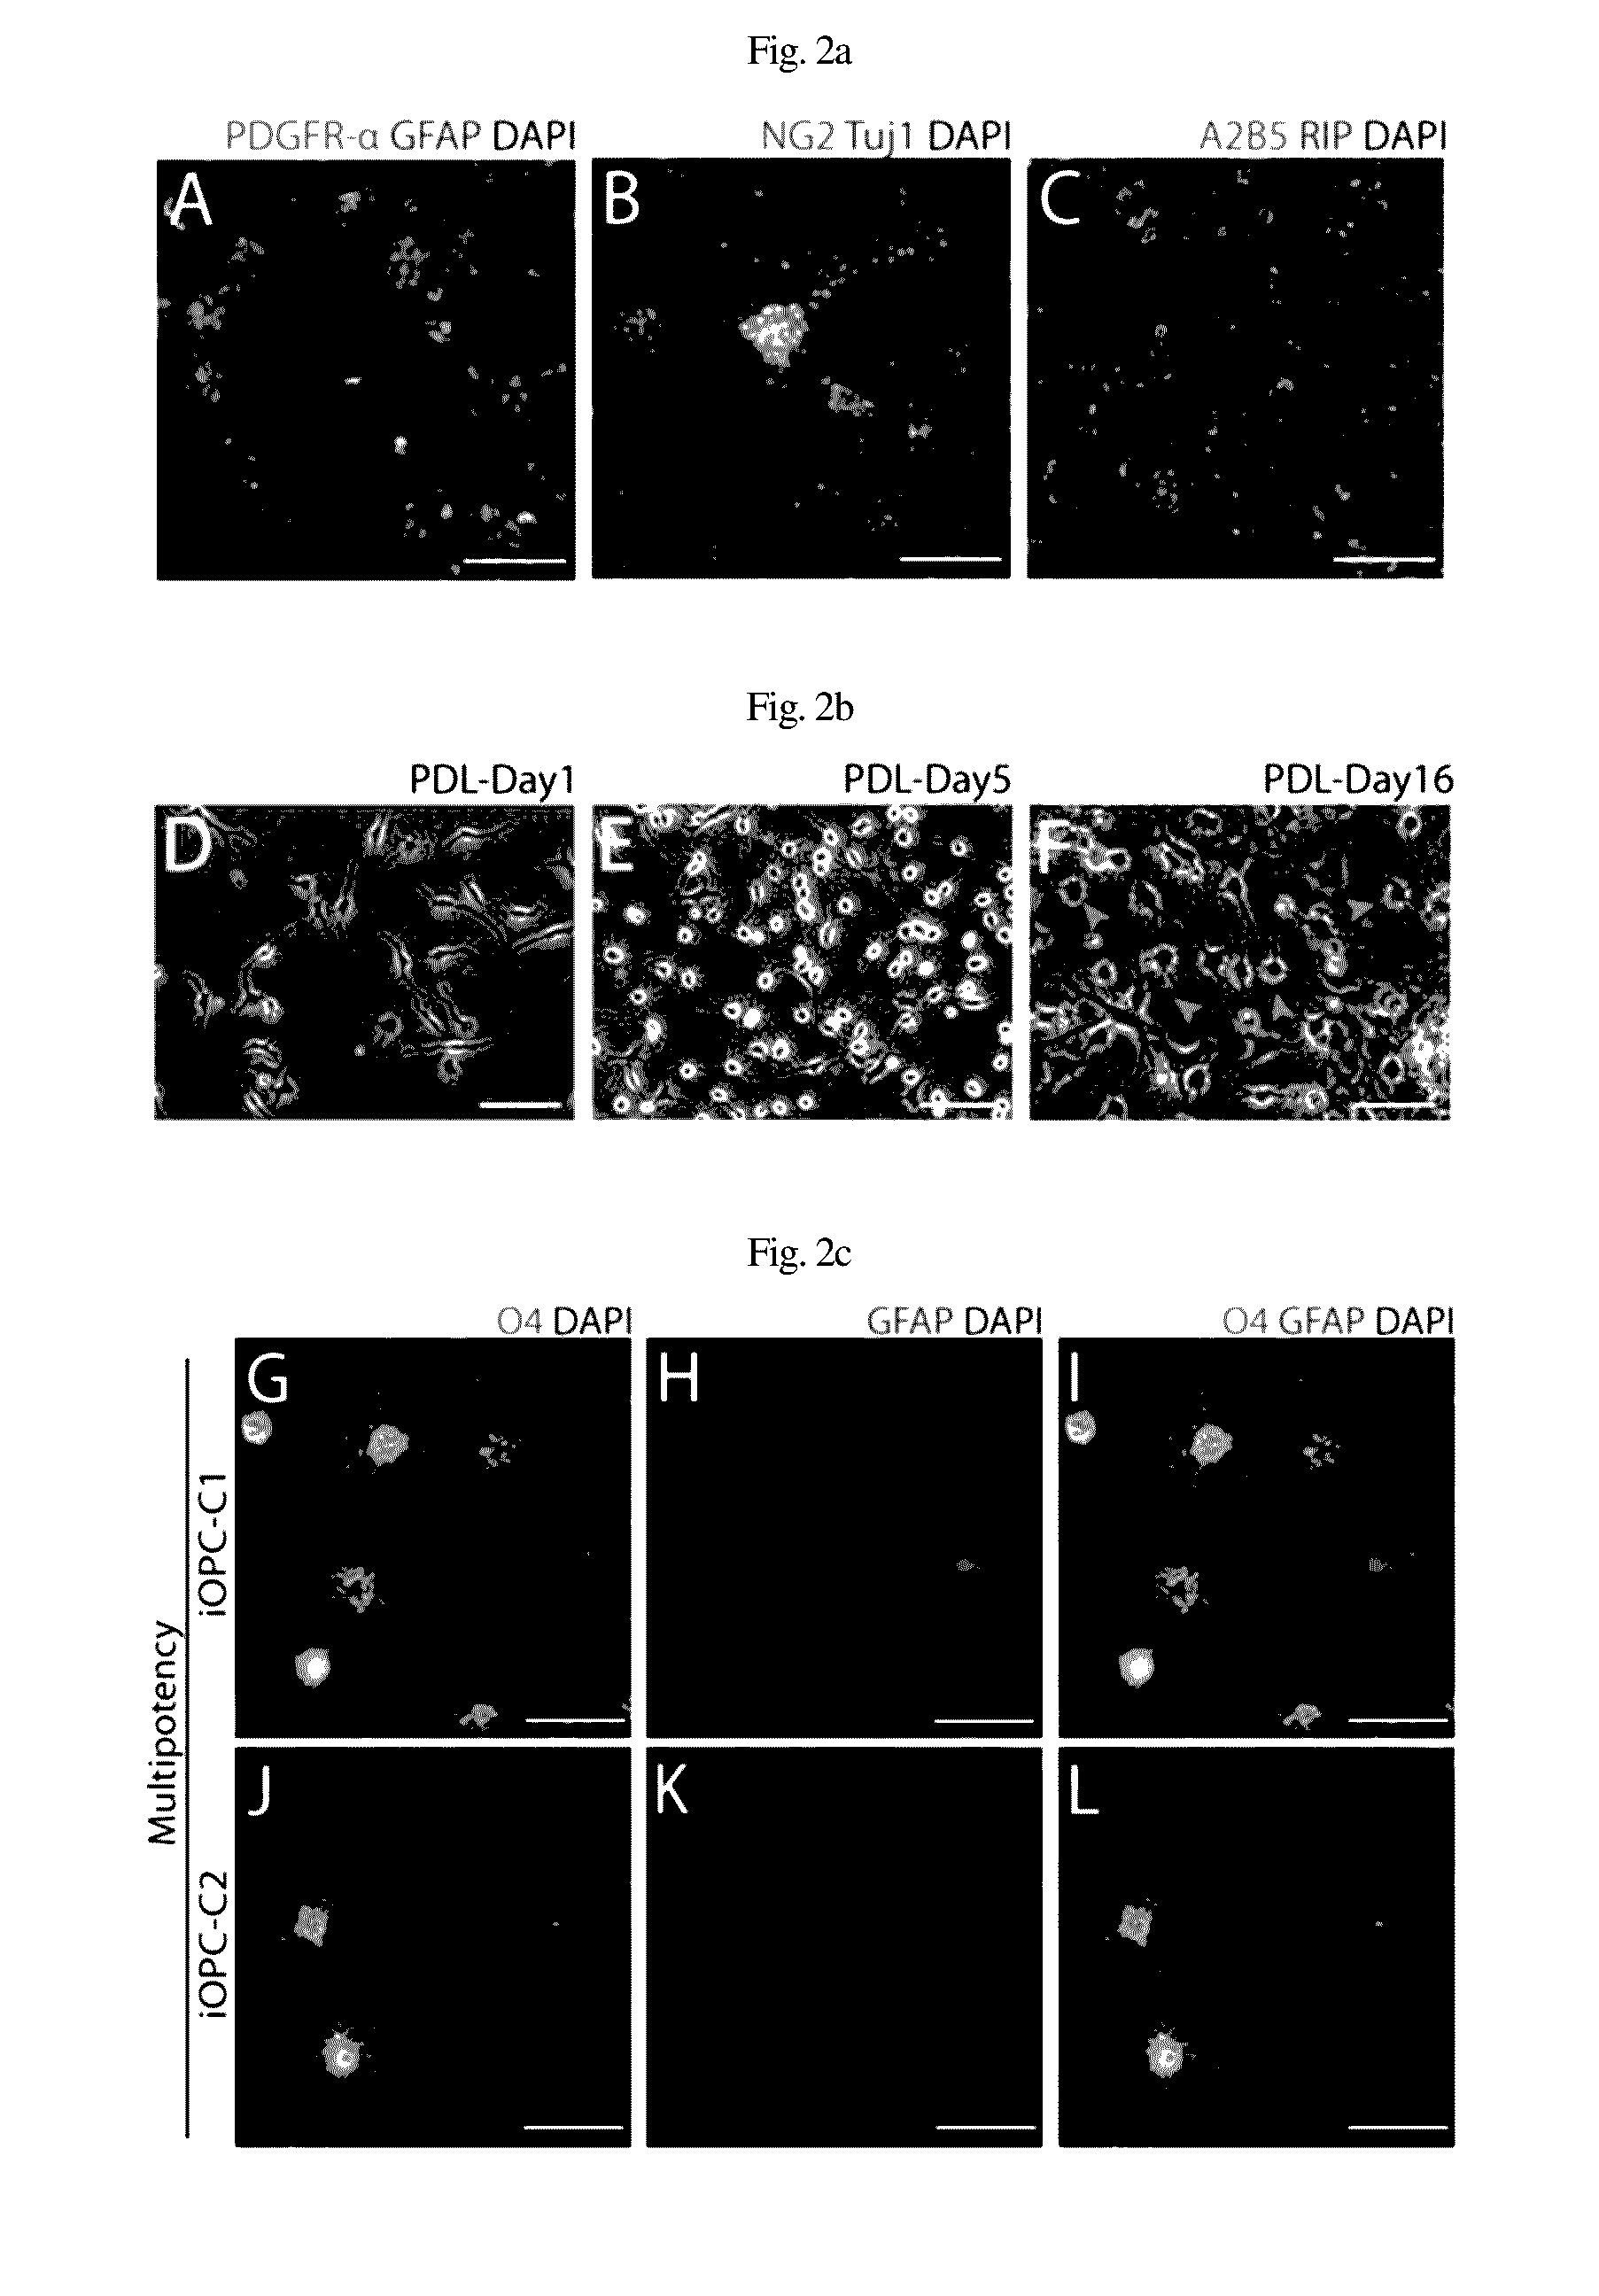 Composition for inducing direct transdifferentiation into oligodendrocyte progenitor cells from somatic cells and use thereof